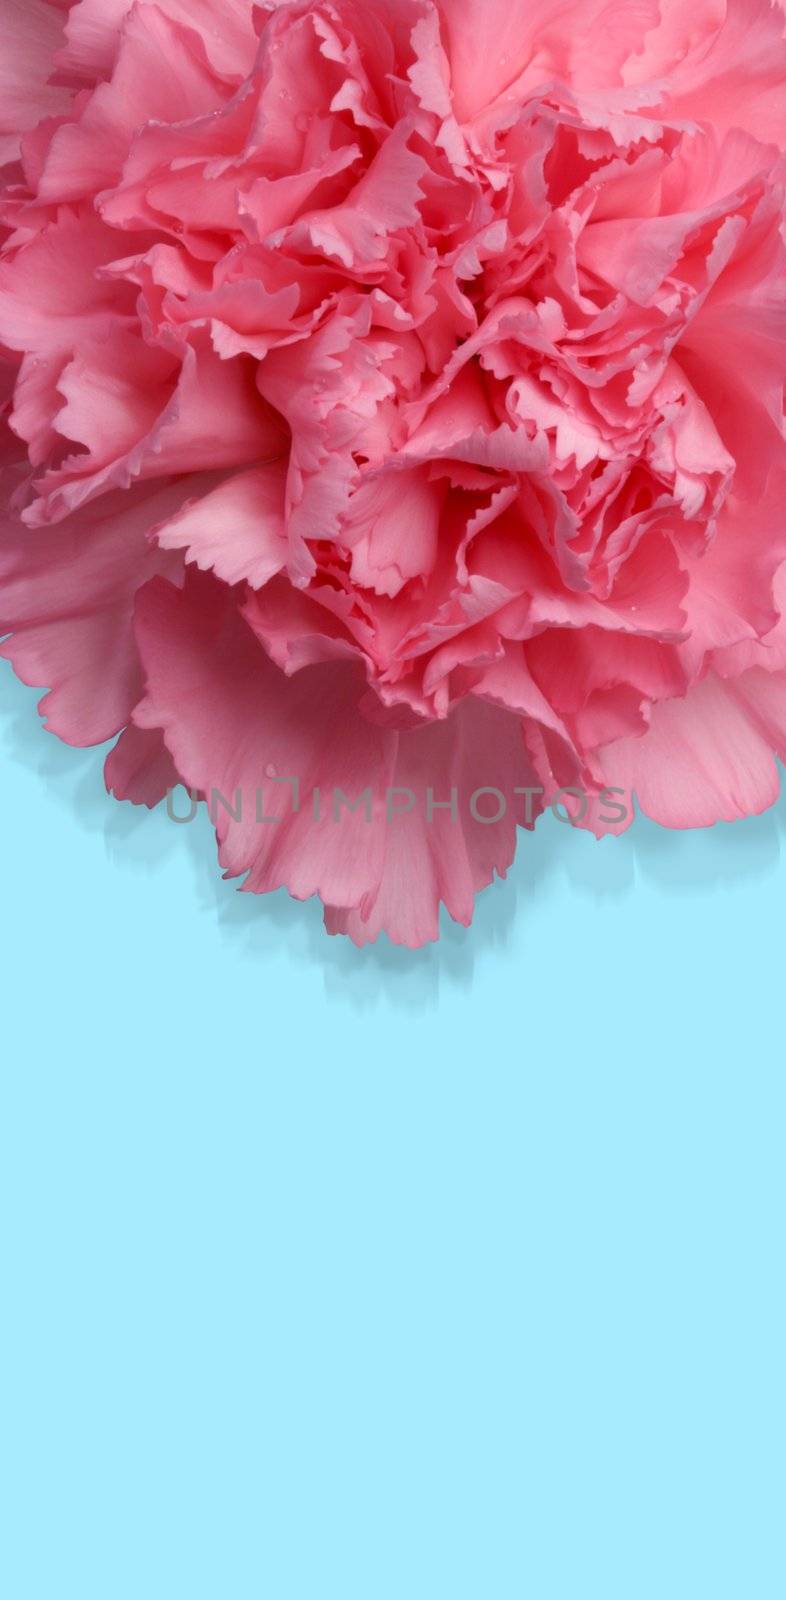 Beautiful macro of carnation flower over blue background - contains a clipping path